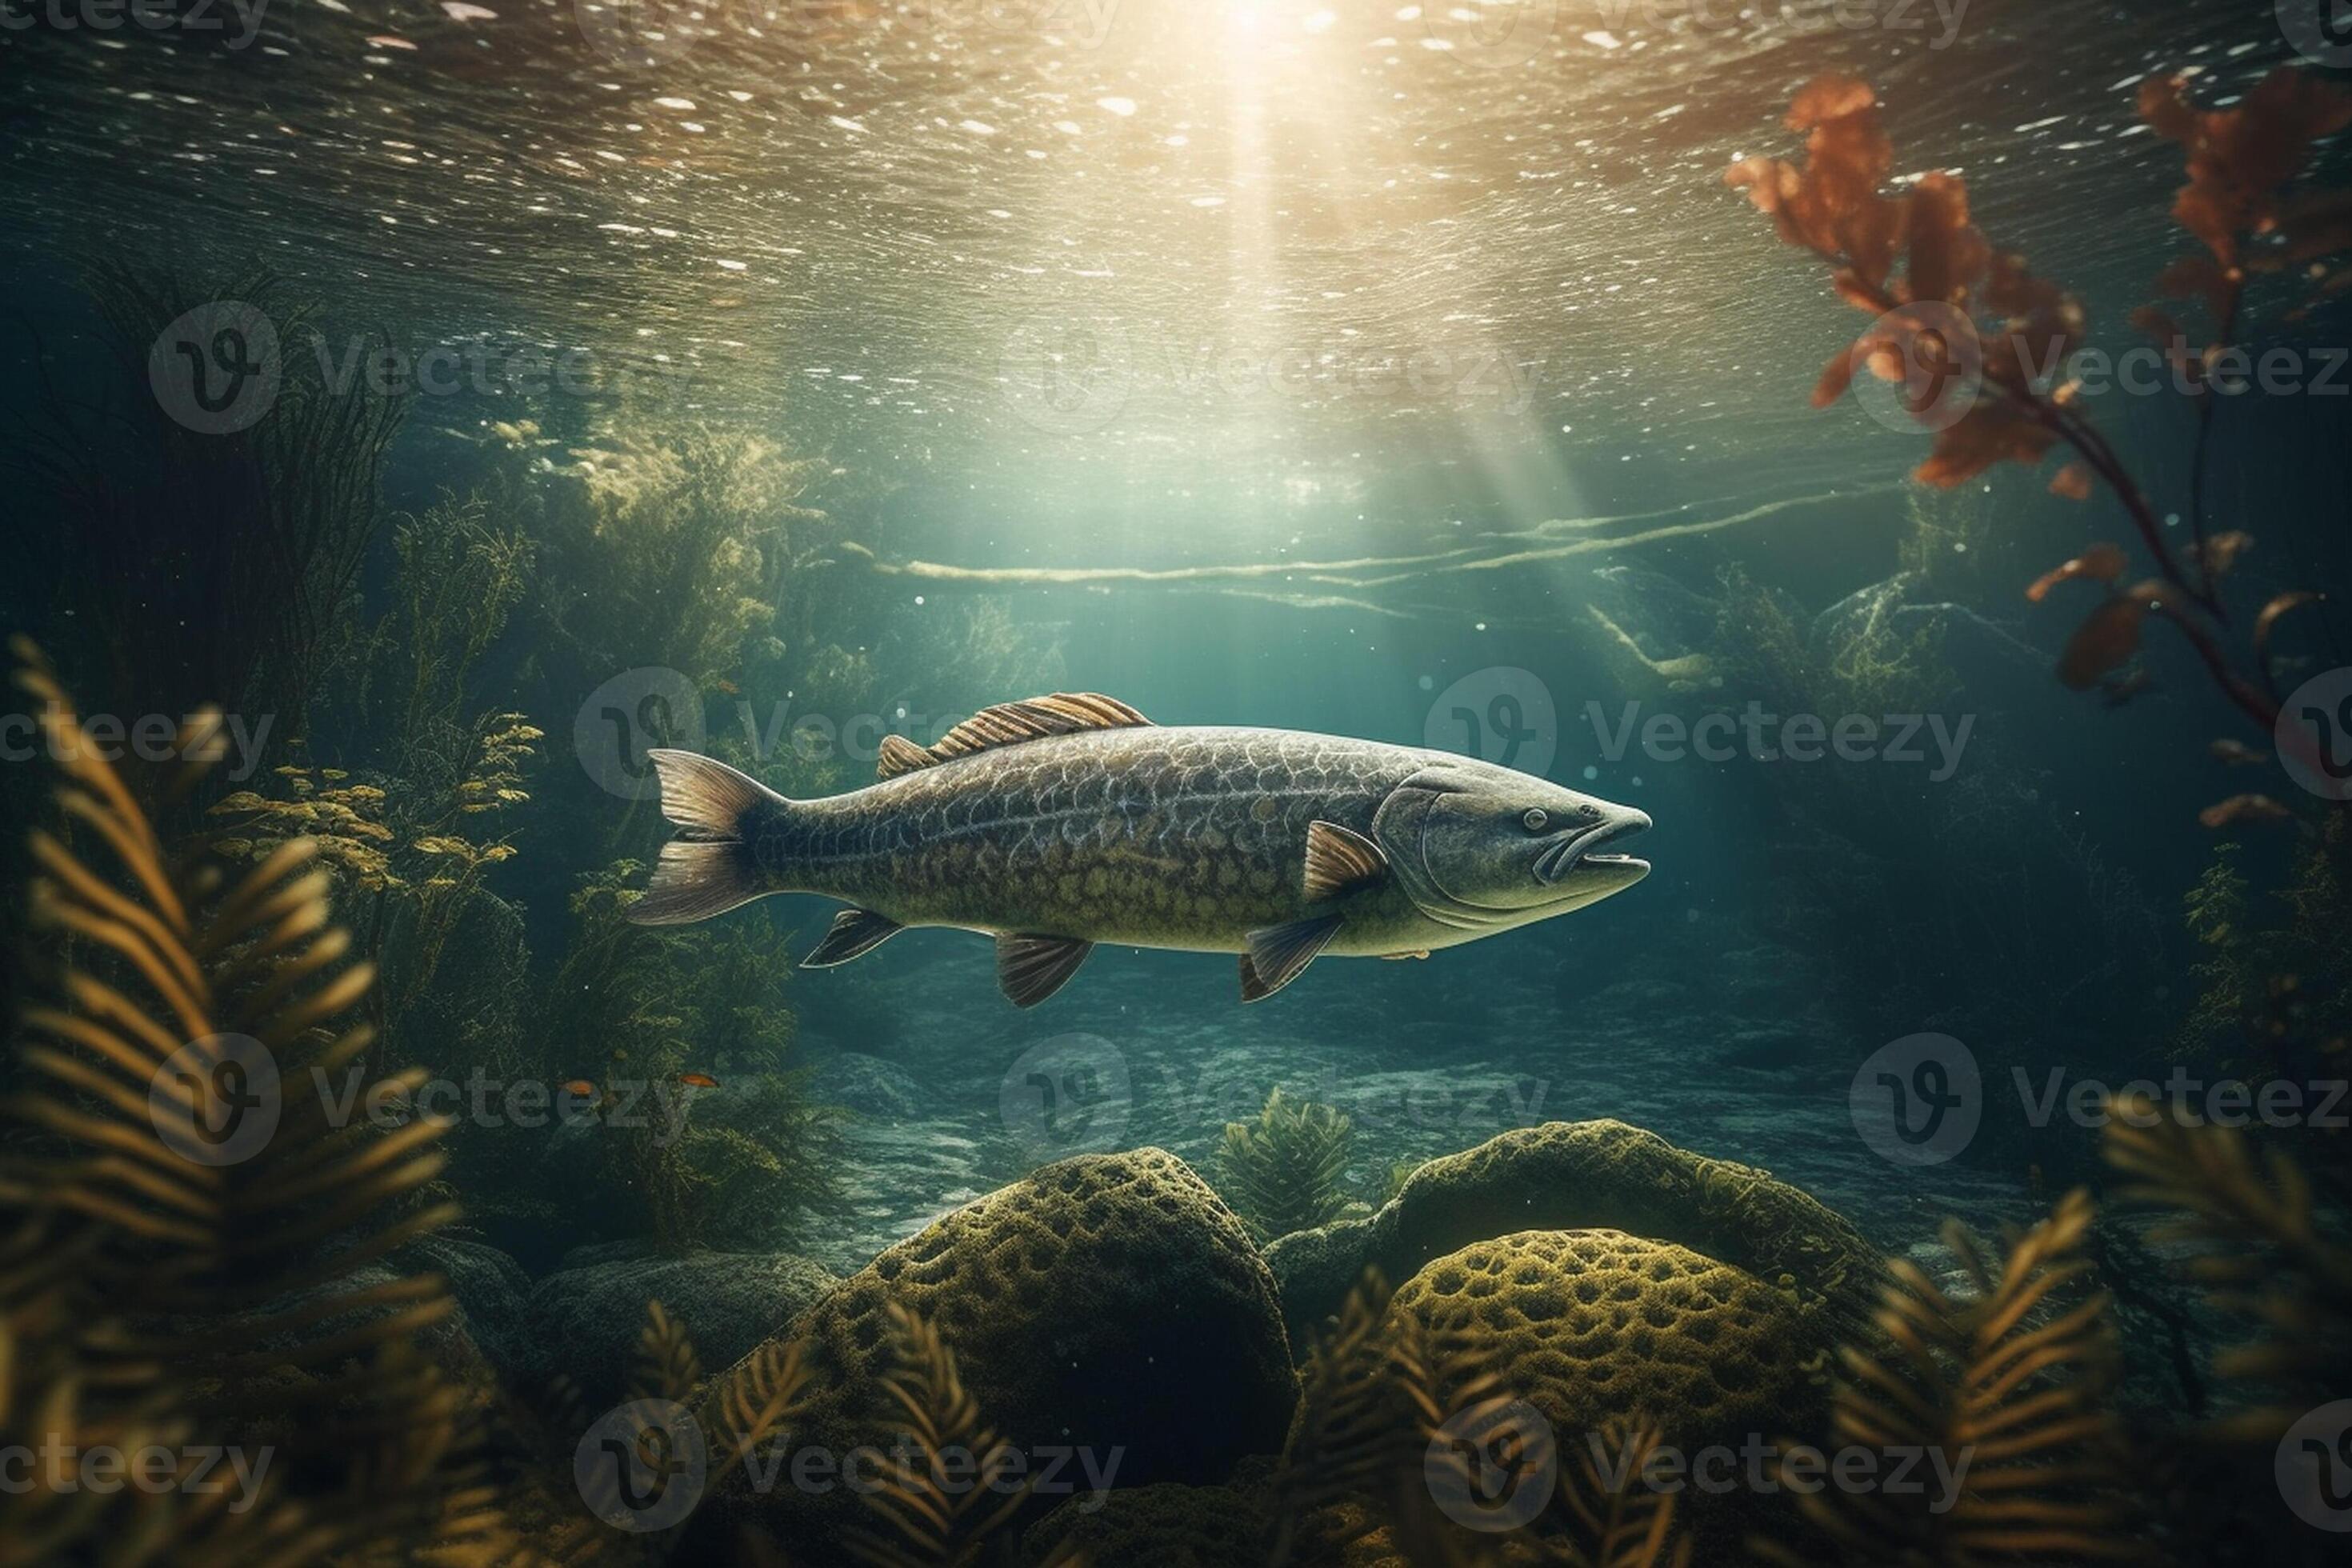 https://static.vecteezy.com/system/resources/previews/022/761/060/large_2x/underwater-view-of-a-rainbow-trout-fish-swimming-in-the-ocean-ai-generated-photo.jpg